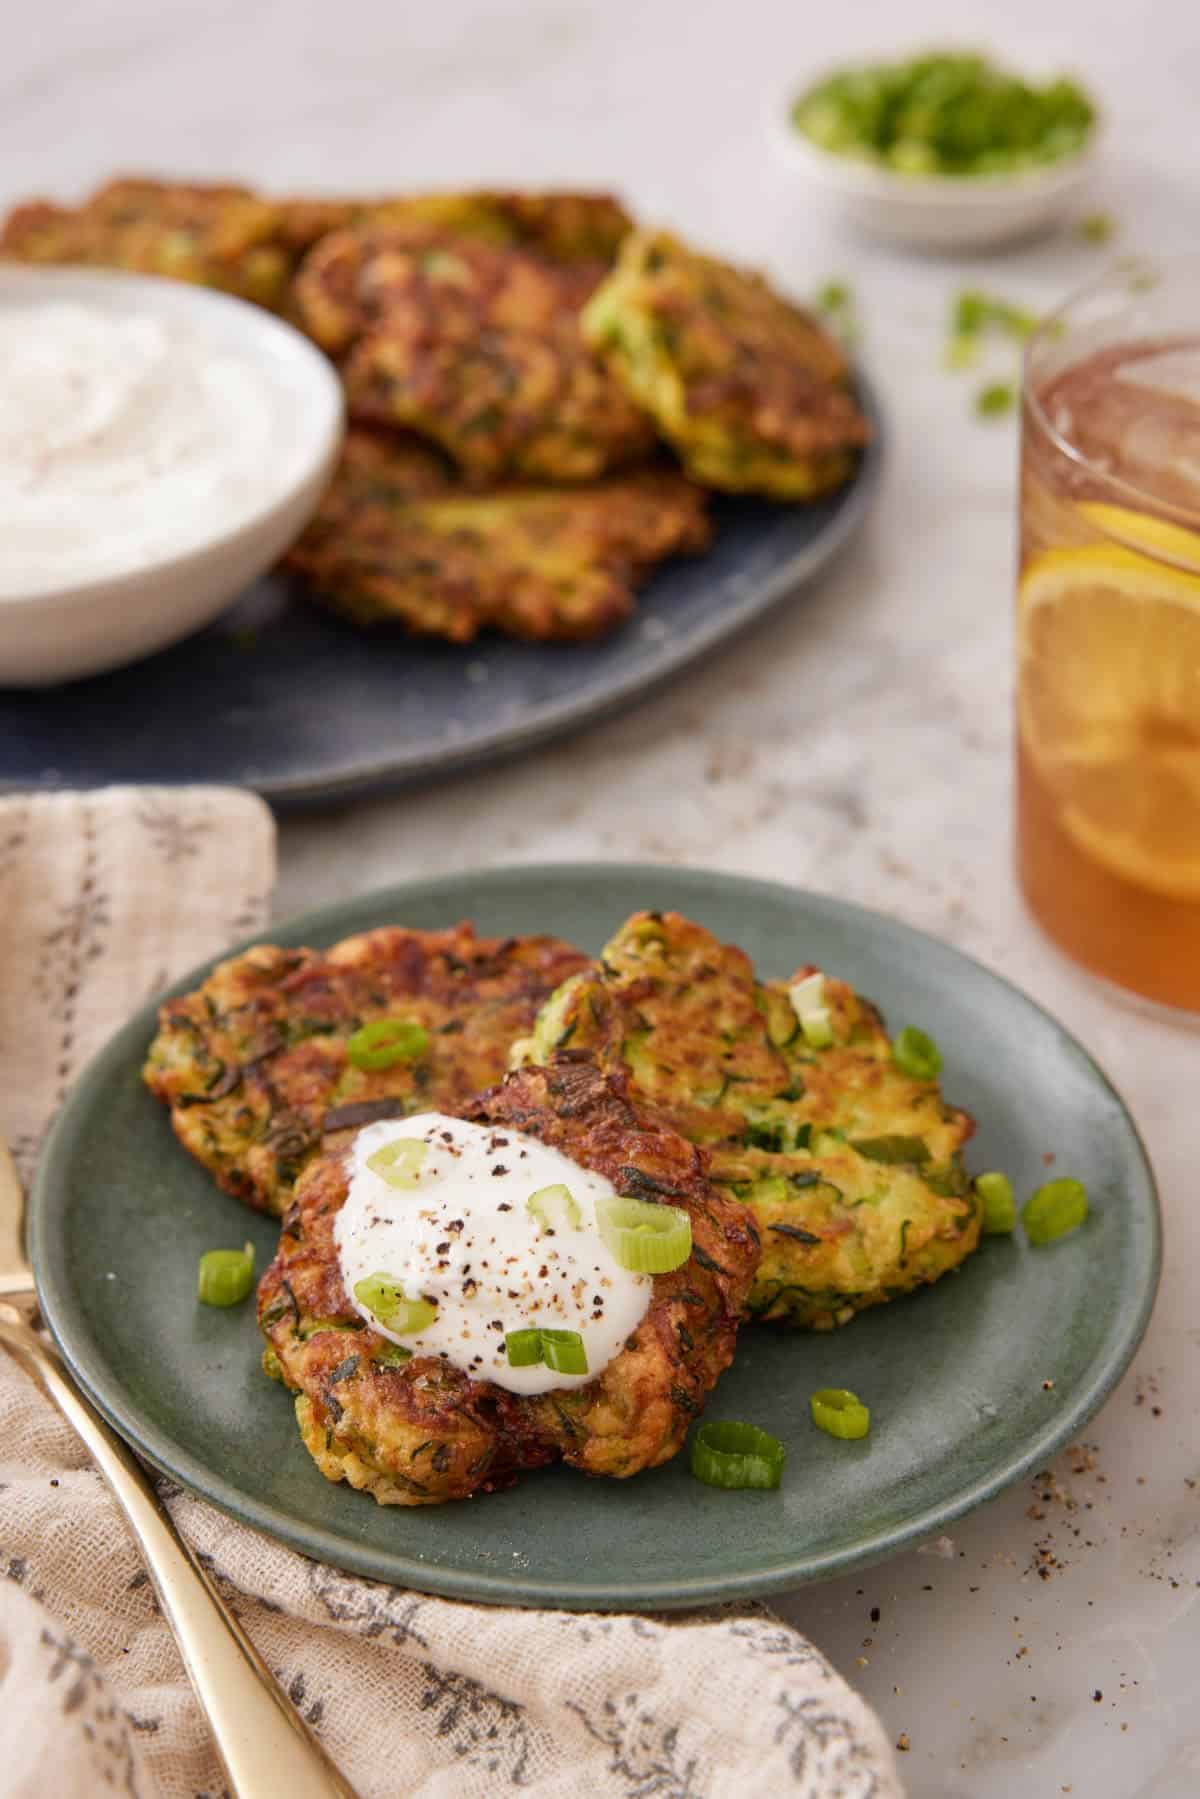 A plate with three zucchini fritters with one with a dollop of sour cream. More zucchini fritters in the background with a glass of iced tea.